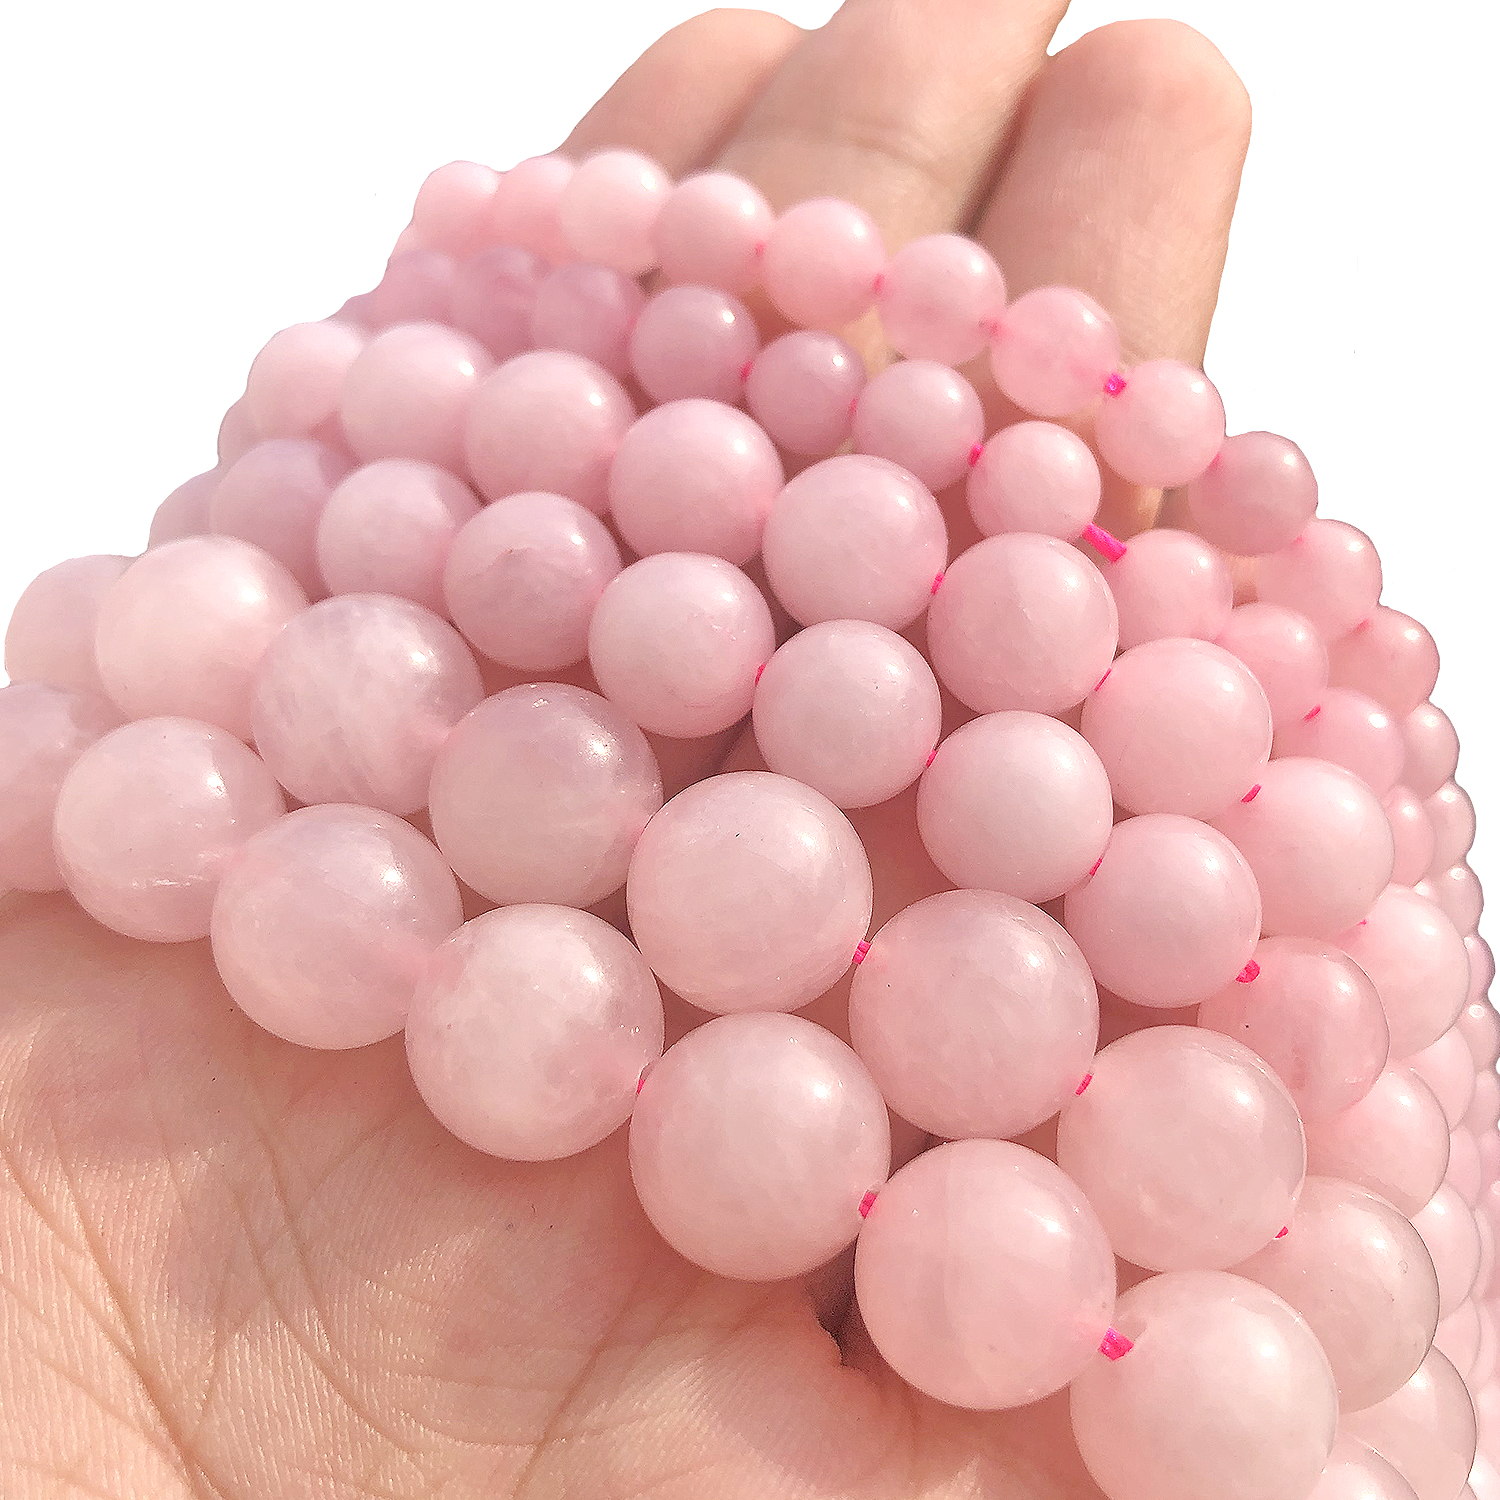 Natural Stone Pink Quartz Rondelle Wheel Round Loose Spacer Beads for  Needlework Jewelry Making DIY Charms Bracelet Accessories